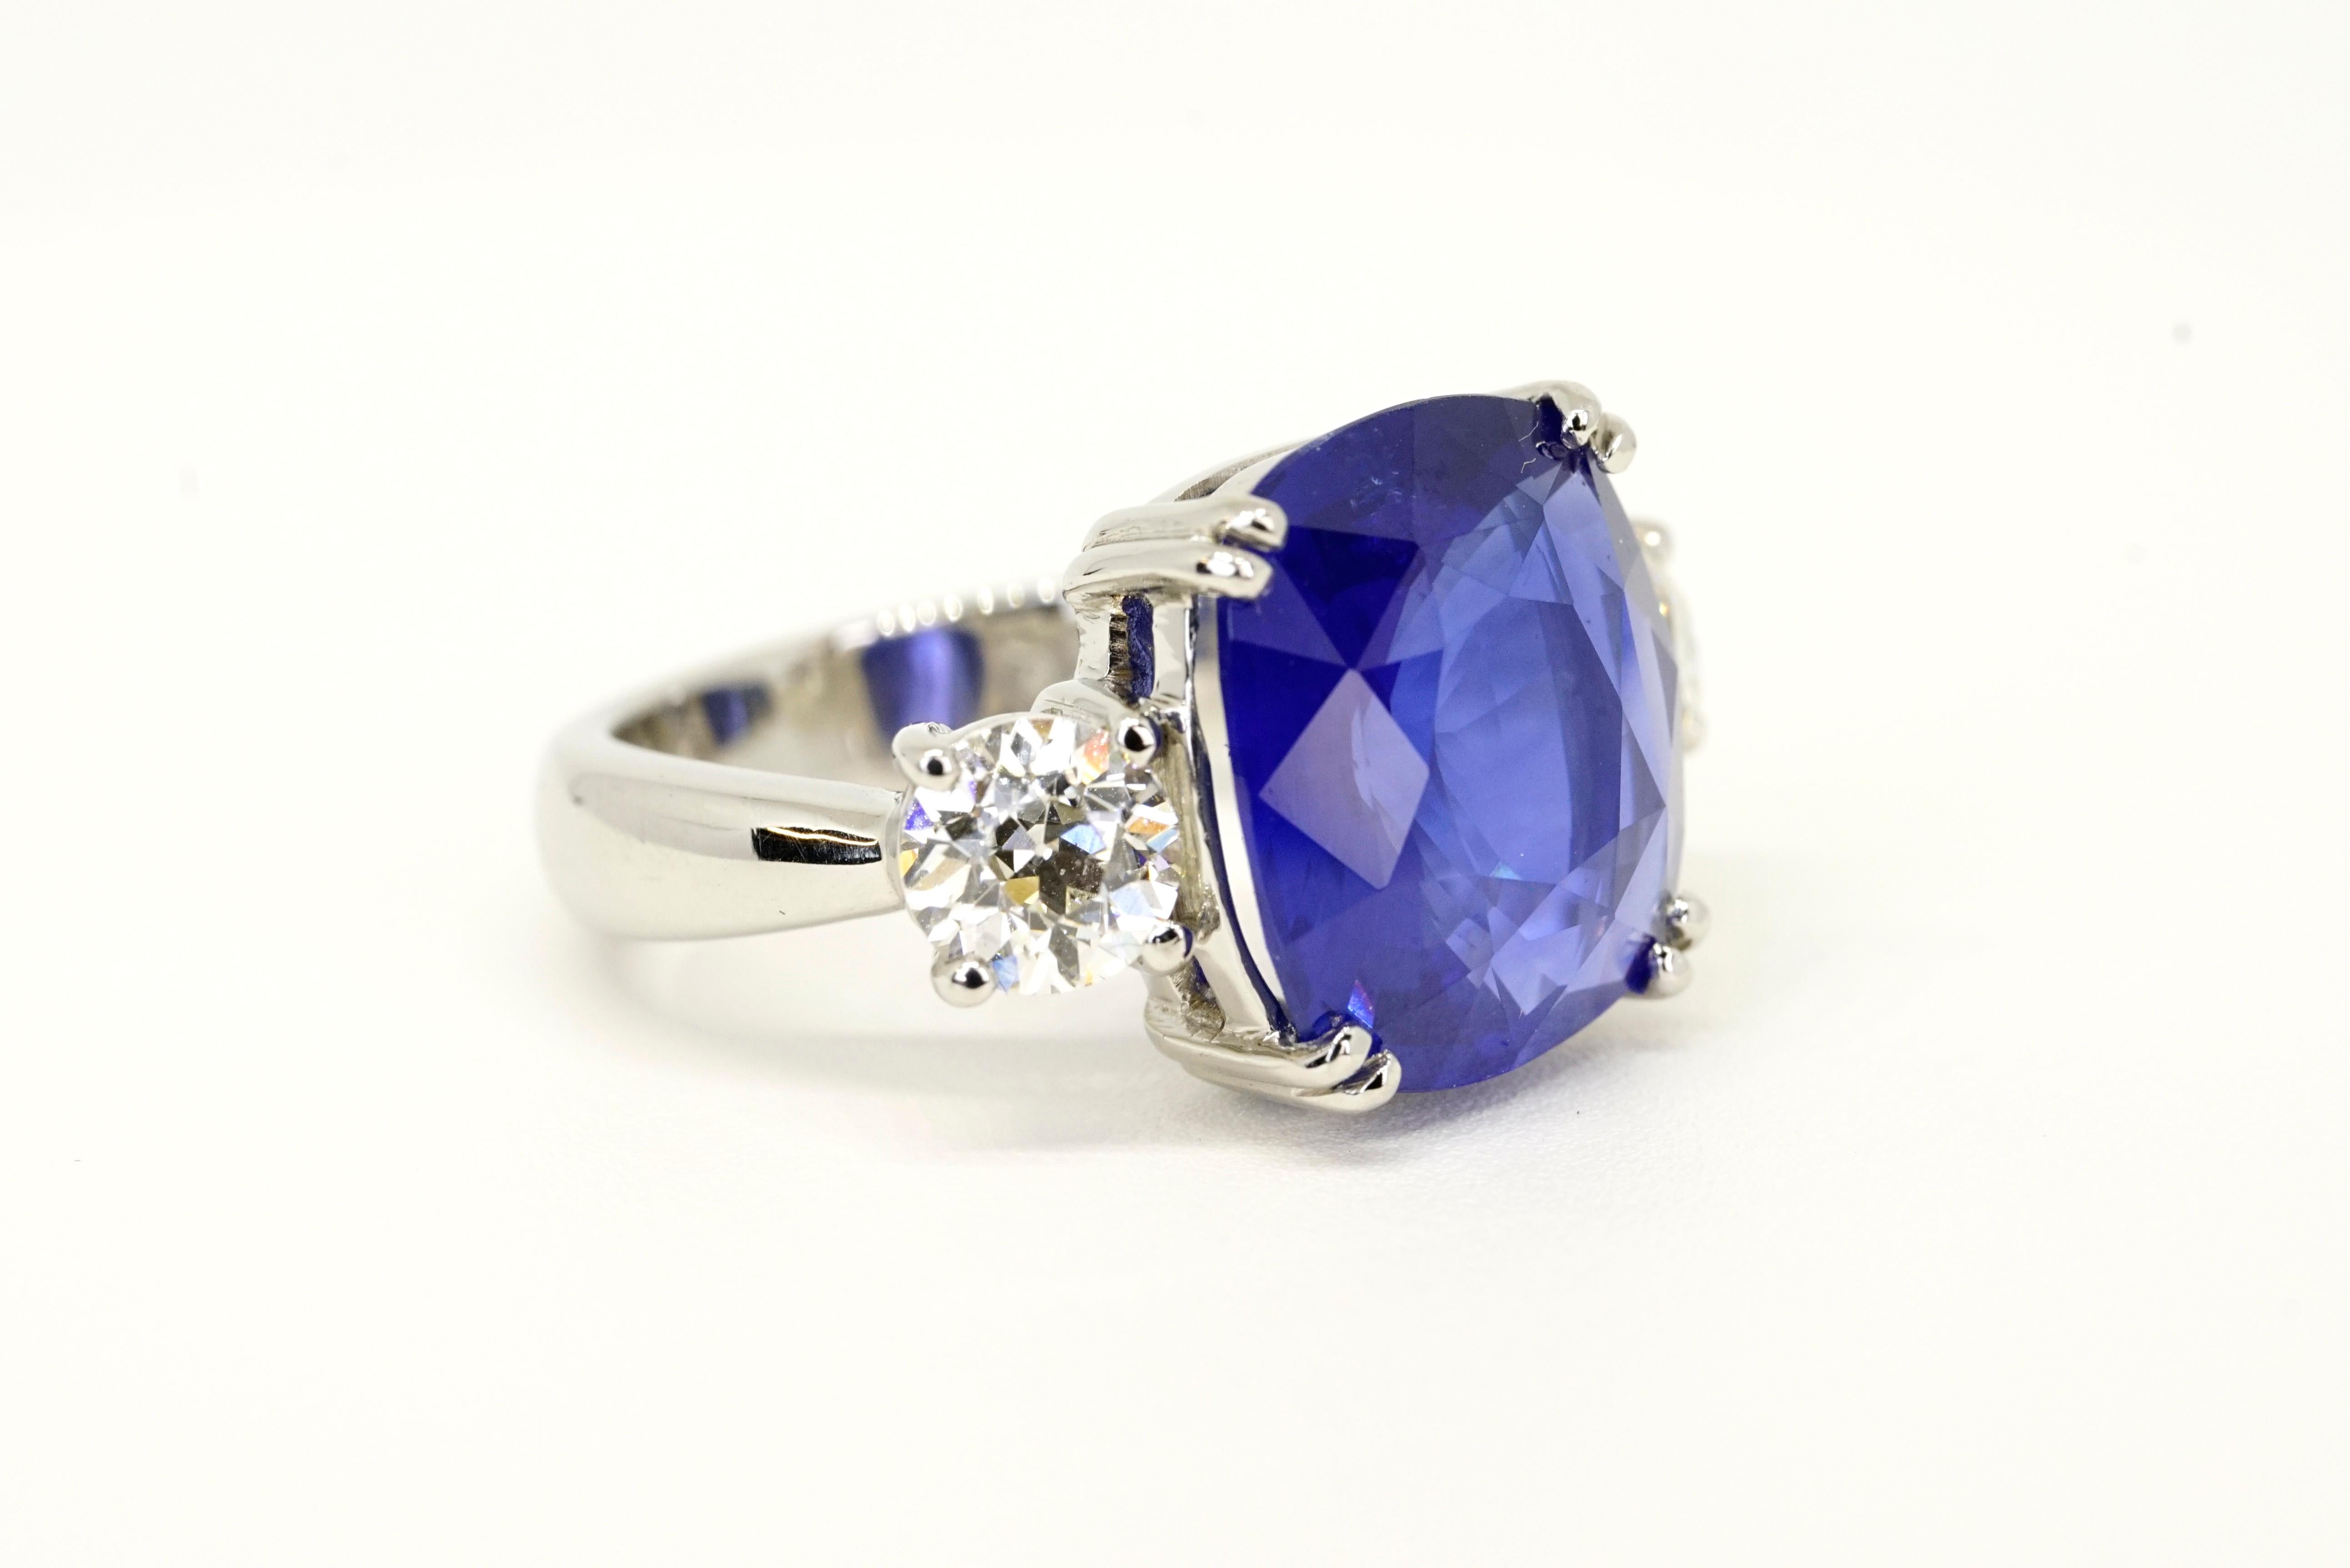 Extravagant 9.67 Carats Natural Ceylon Sapphire Antique Cushion (extremely well cut) Set in Platinum three stone ring, this Ceylon sapphire is a deeper blue than most traditional Ceylon making it an extremely vibrant and lively - accompanied with